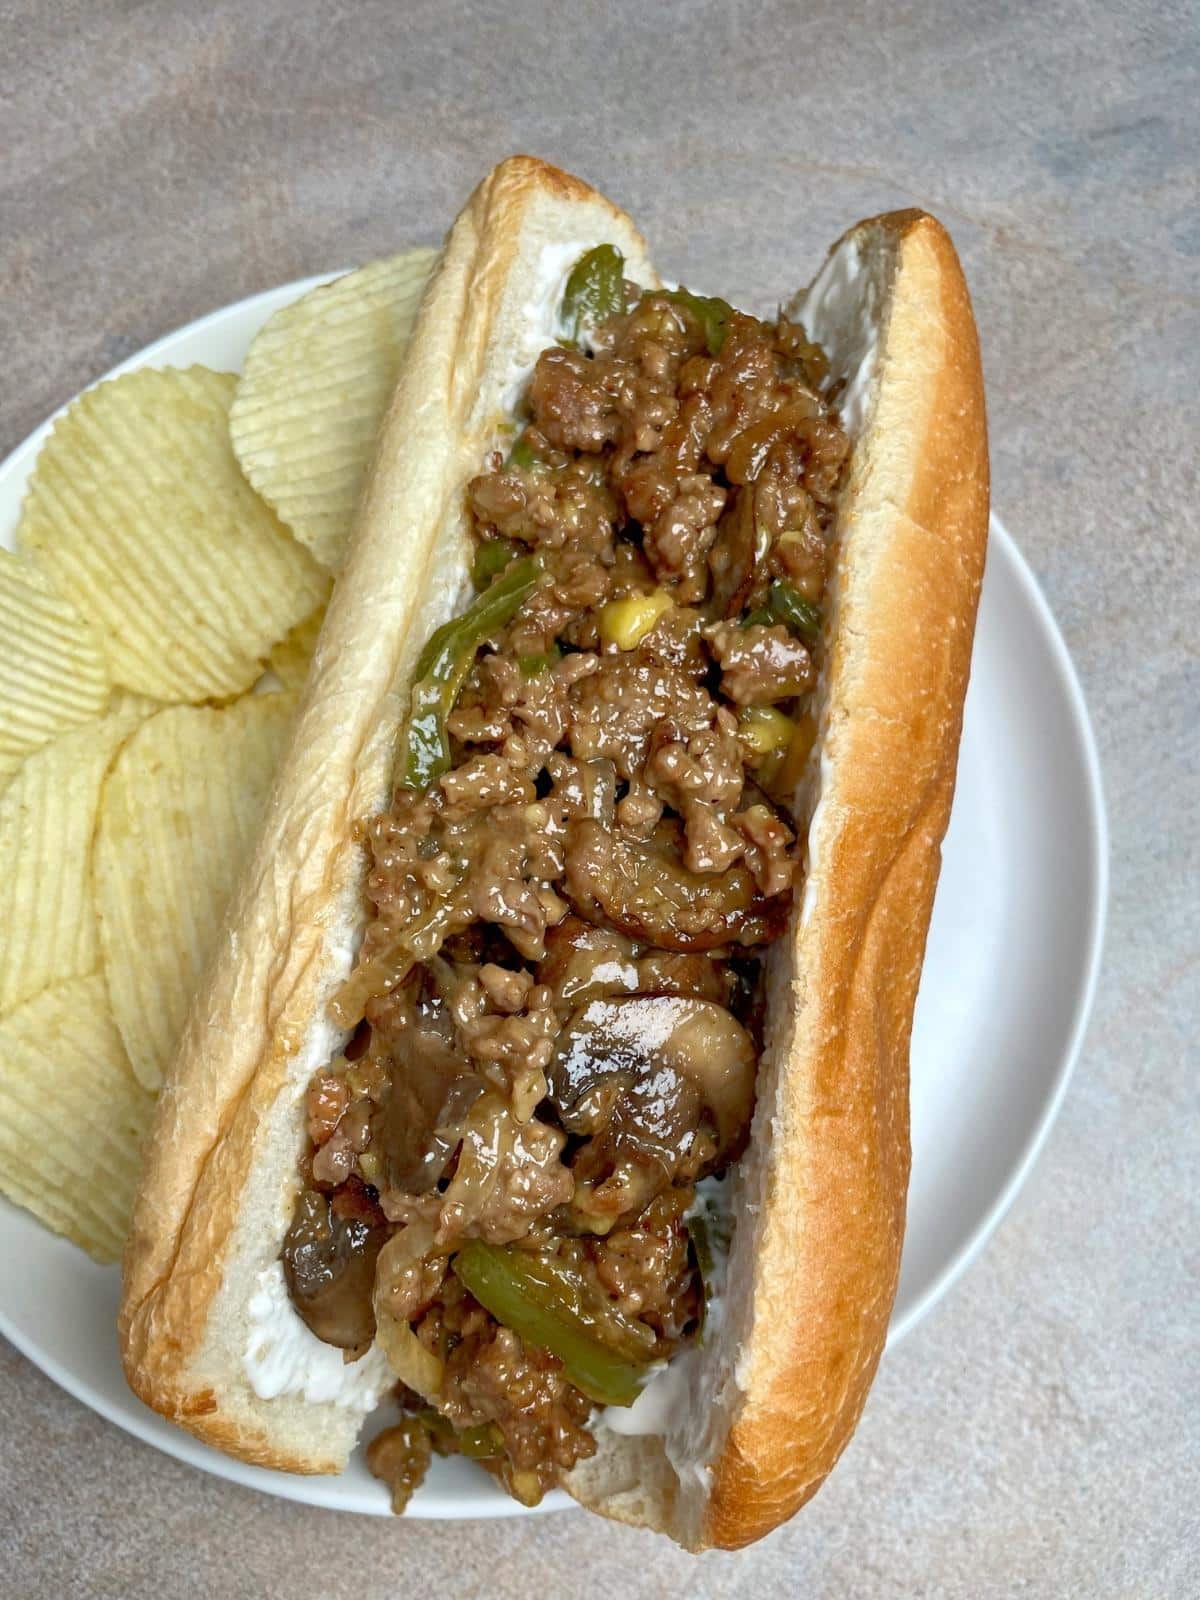 Cheese steak with chips.